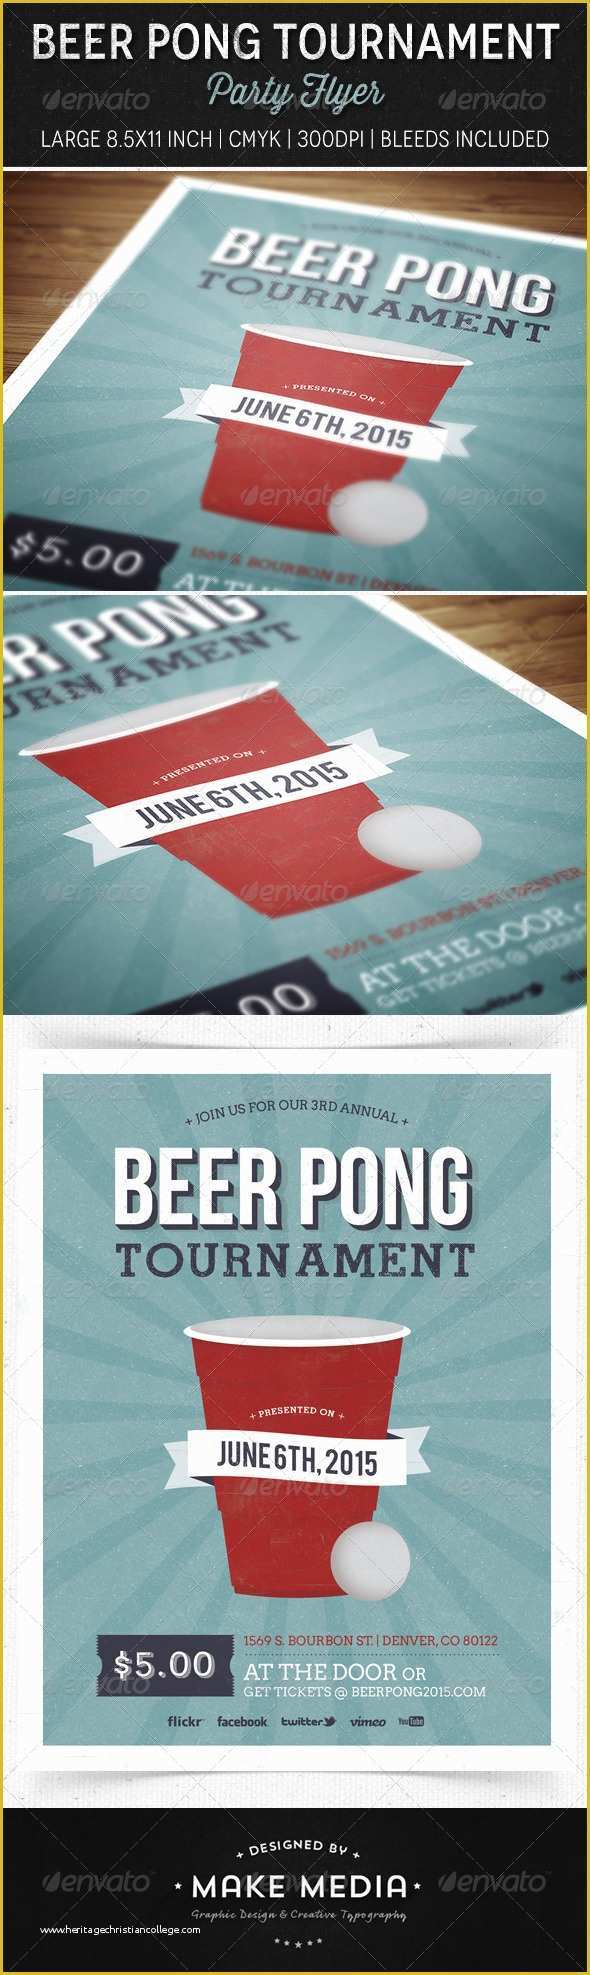 Free Beer Pong Flyer Template Of Beer Pong tournament Flyer Free Psd Tinkytyler